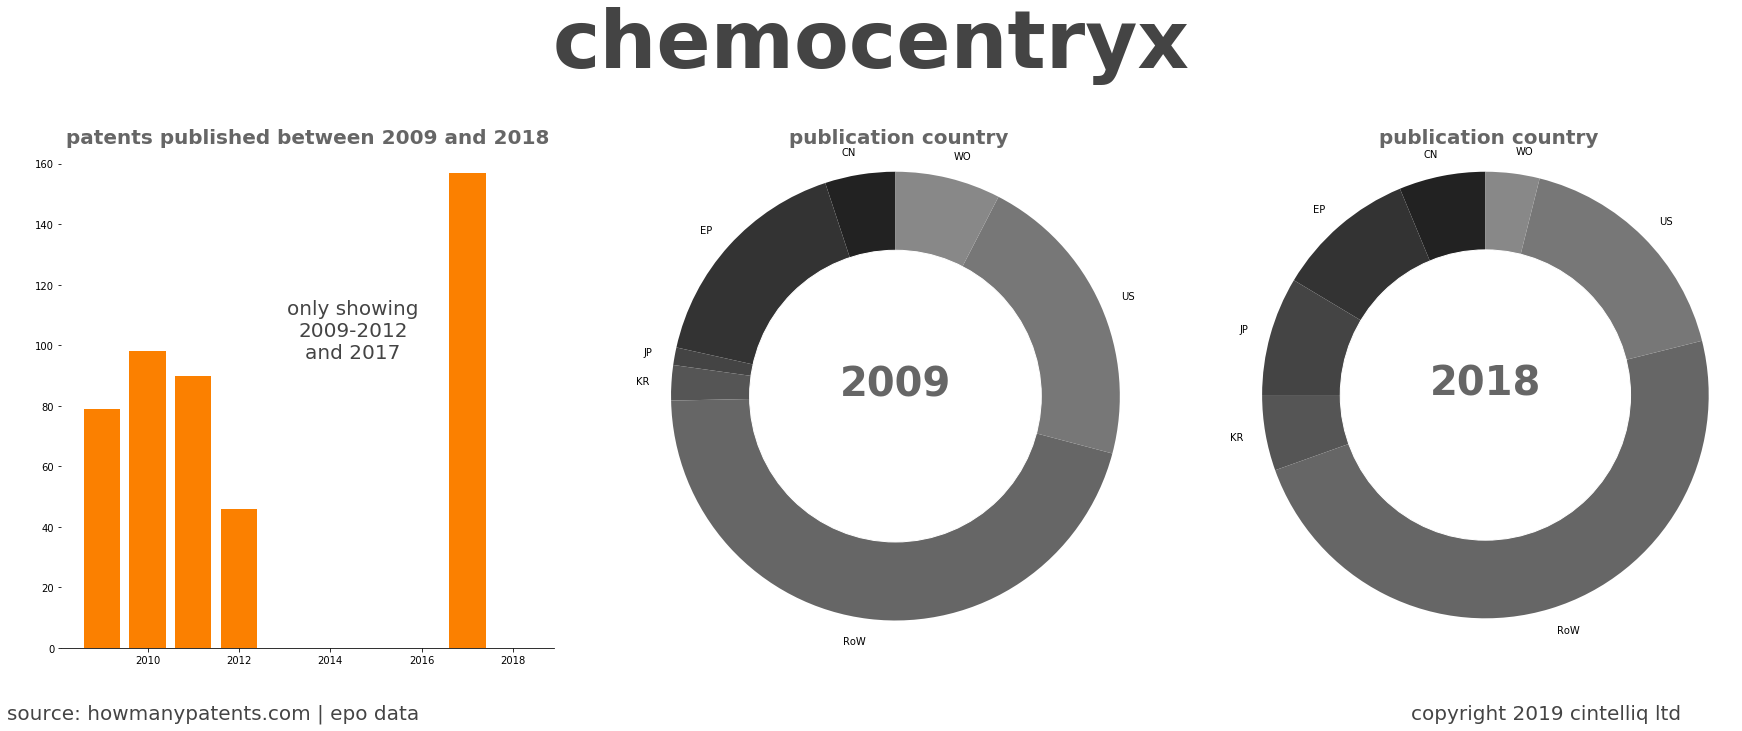 summary of patents for Chemocentryx